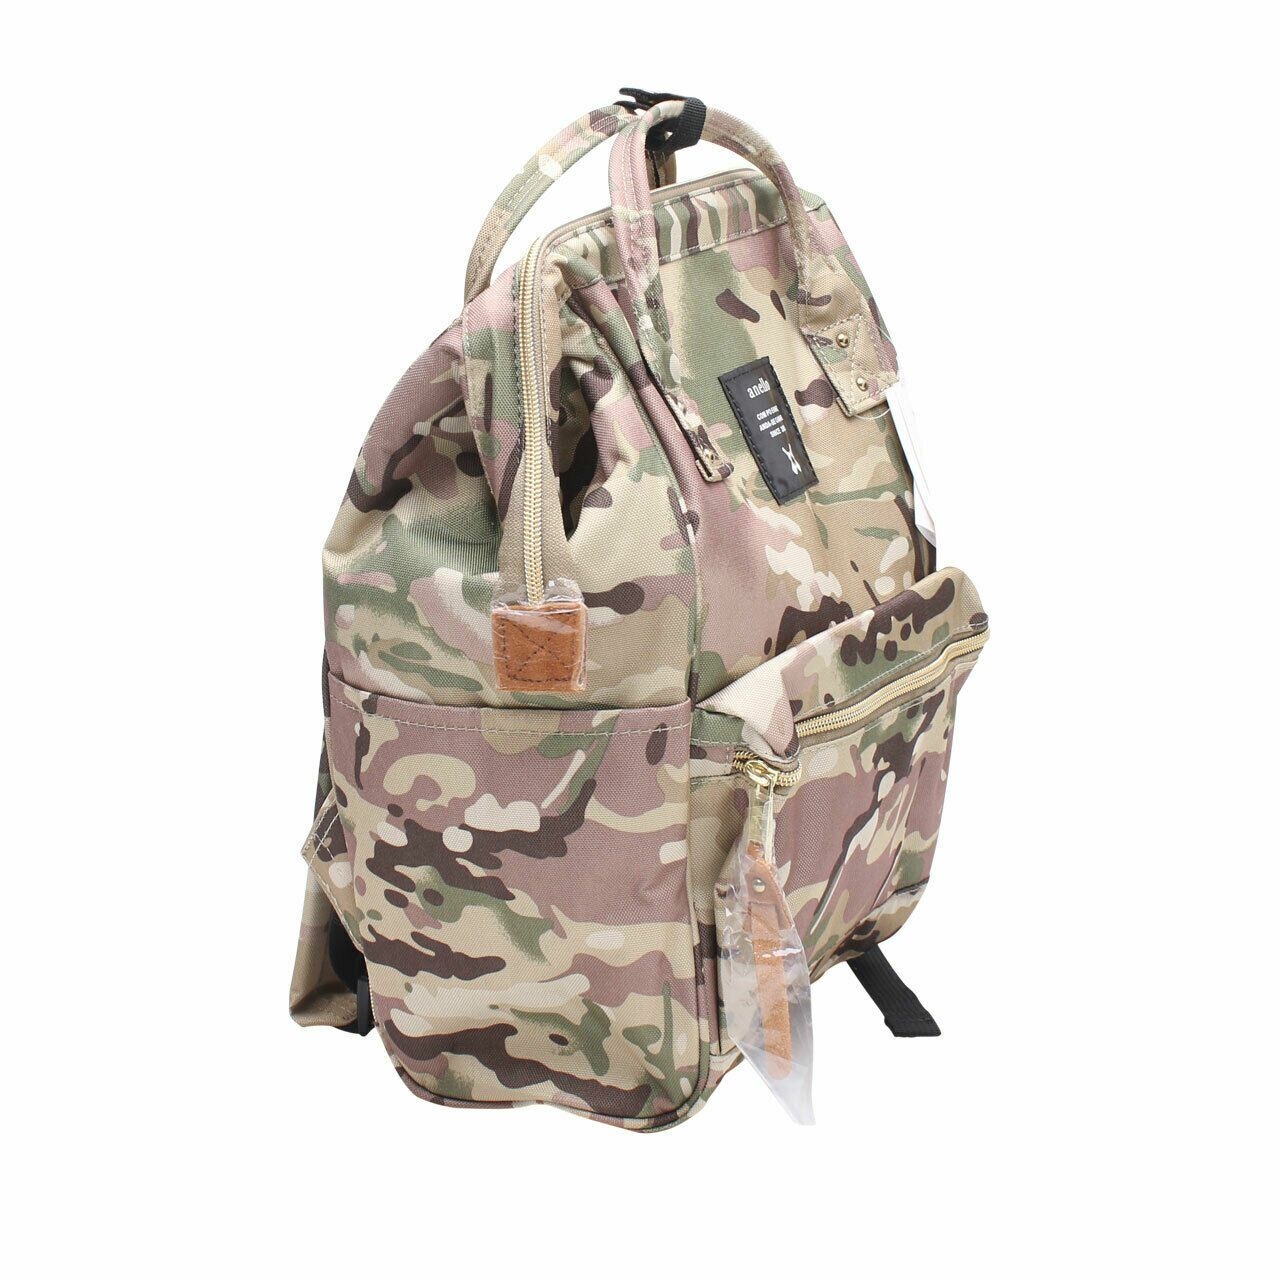 Anello Multicolor Pattern Backpack